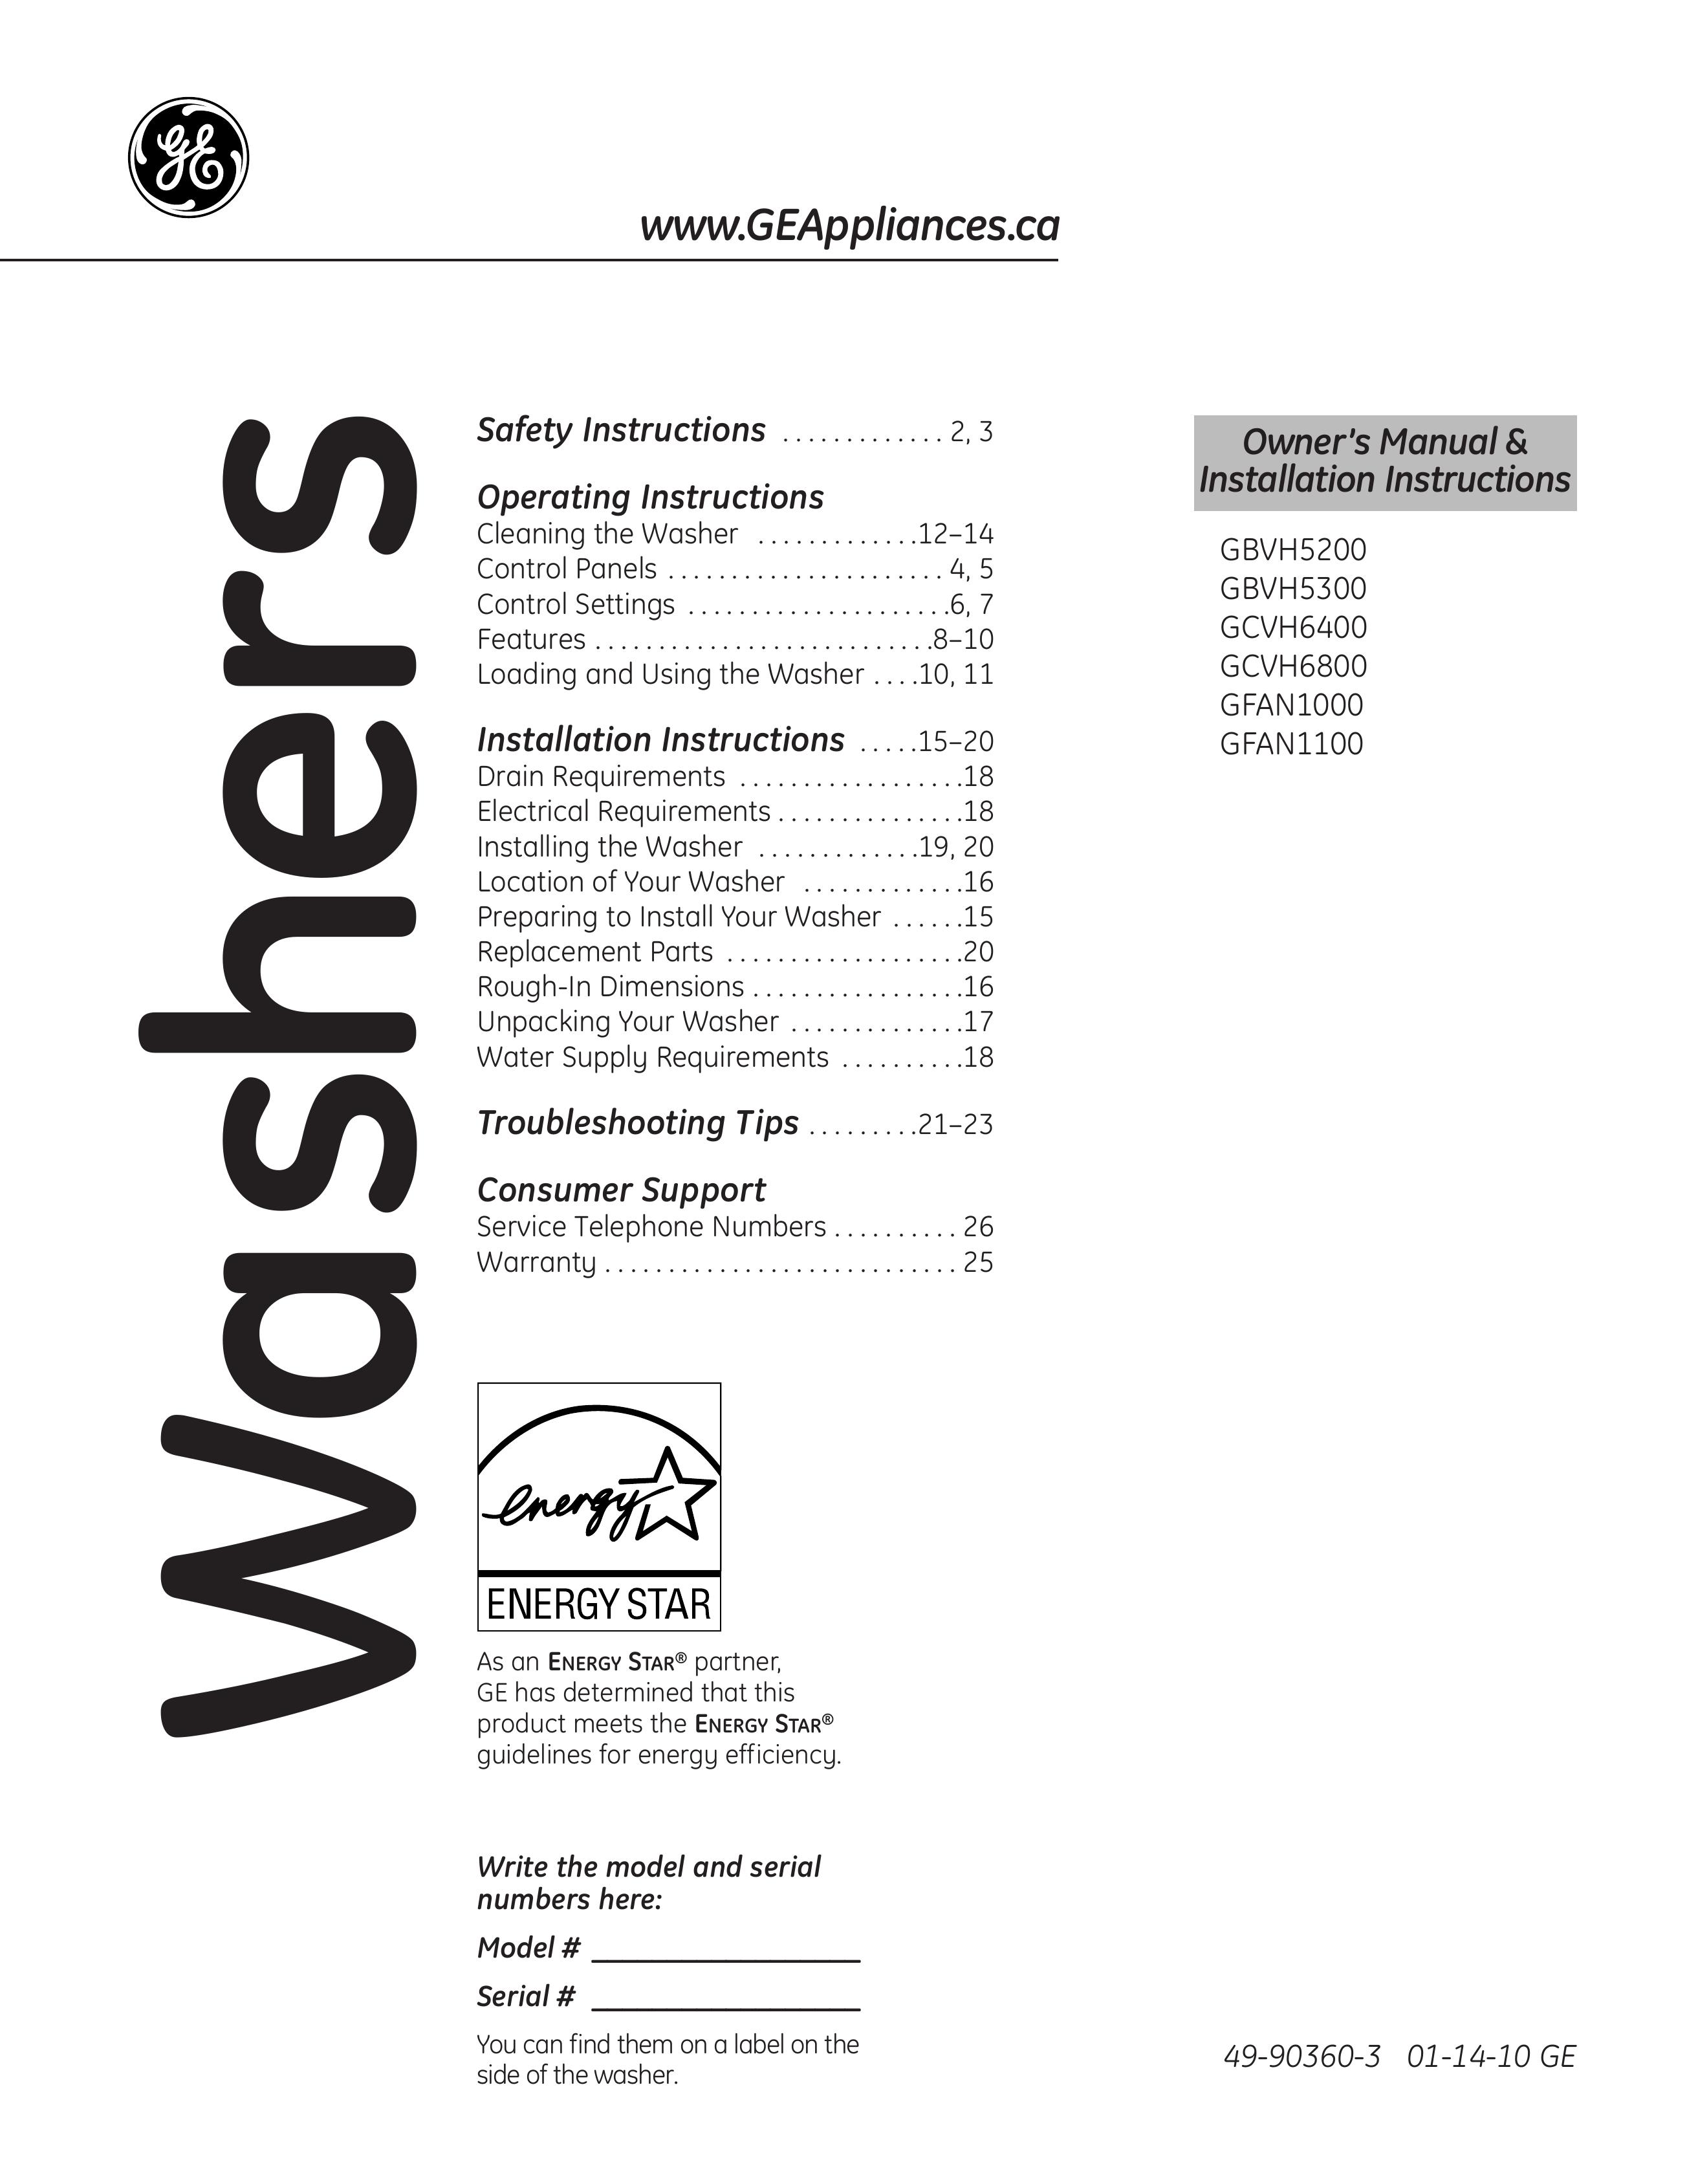 GE GCVH6400 Washer User Manual